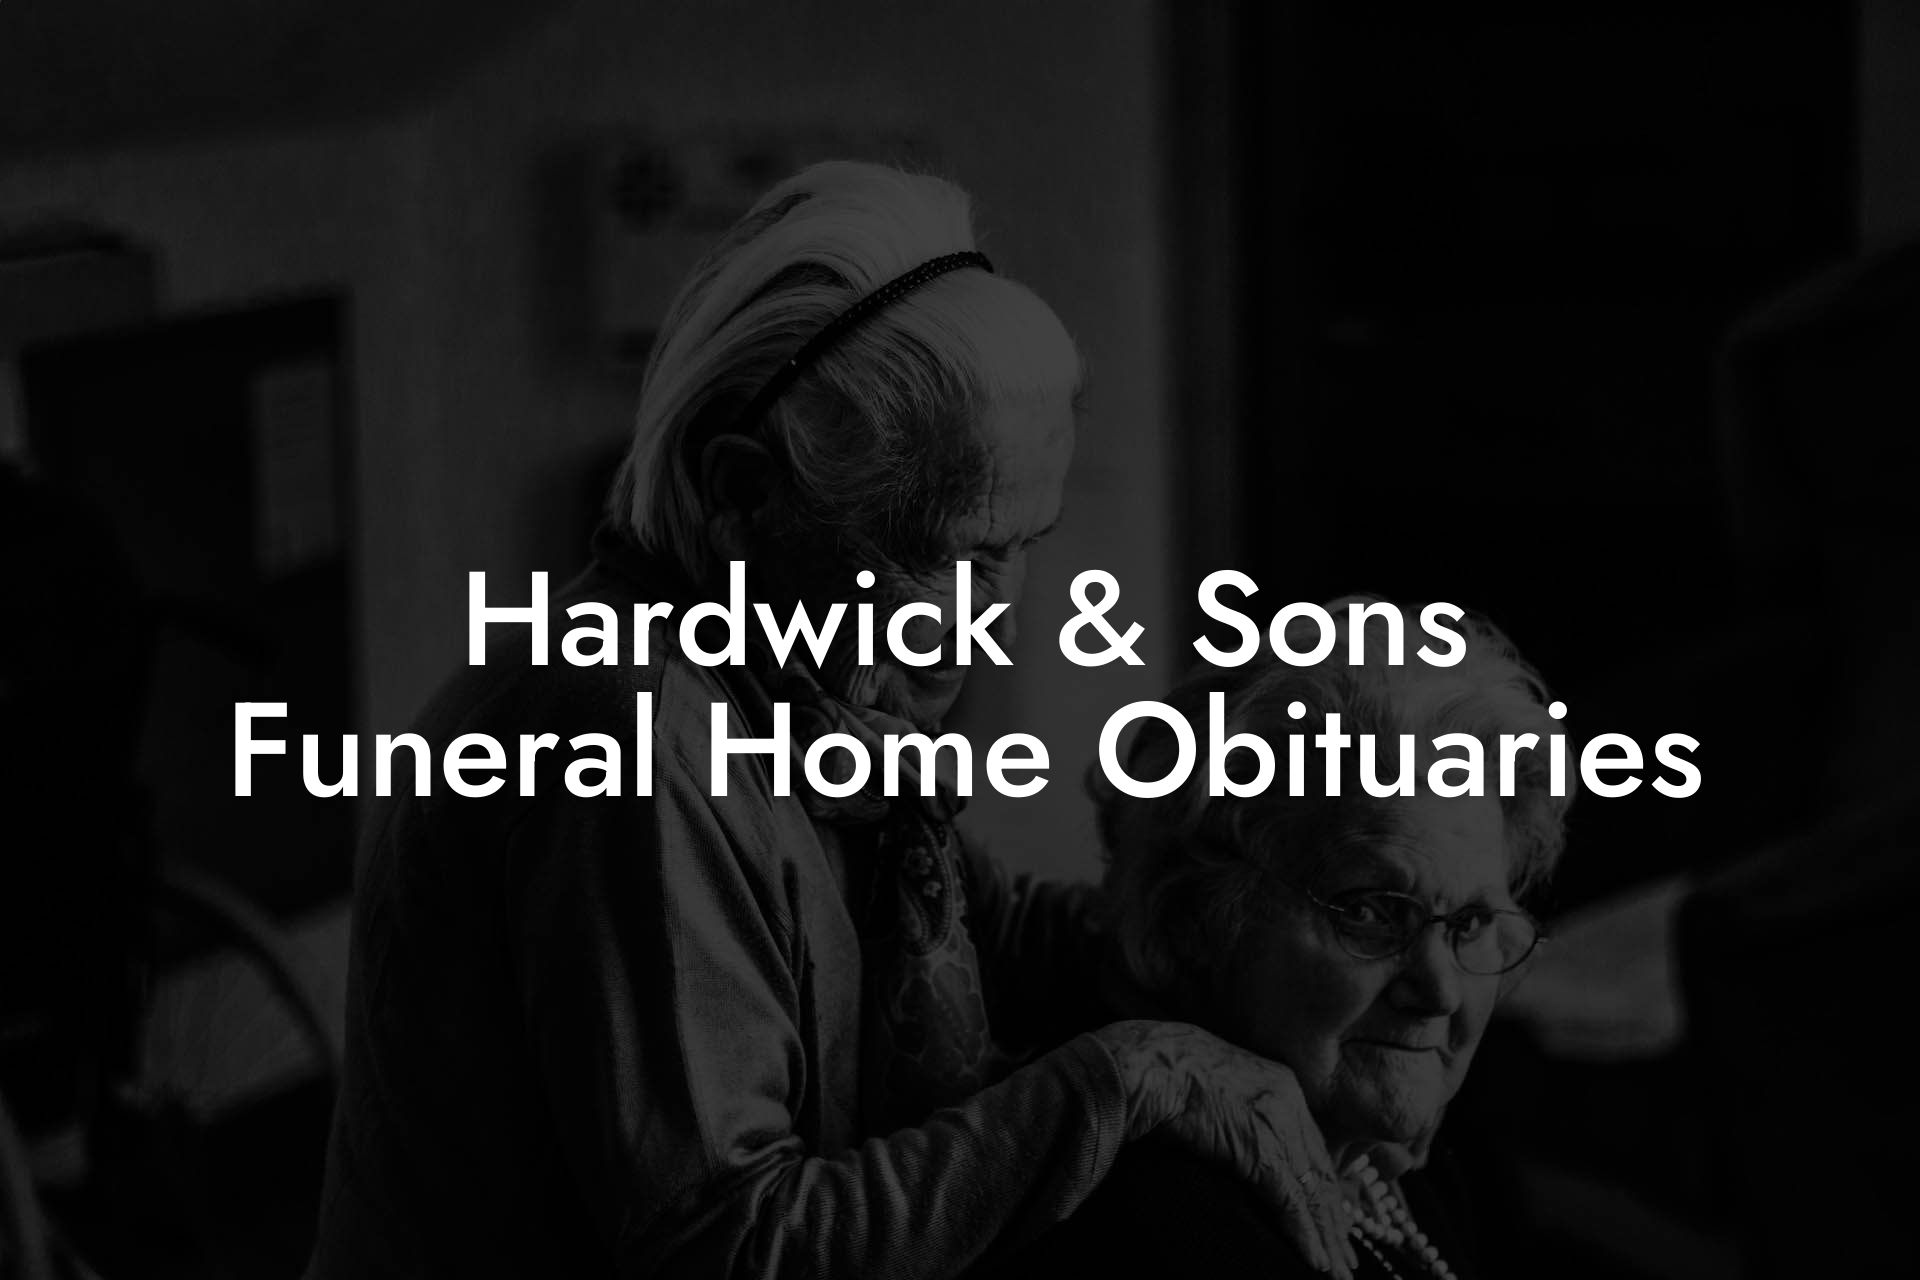 Hardwick & Sons Funeral Home Obituaries